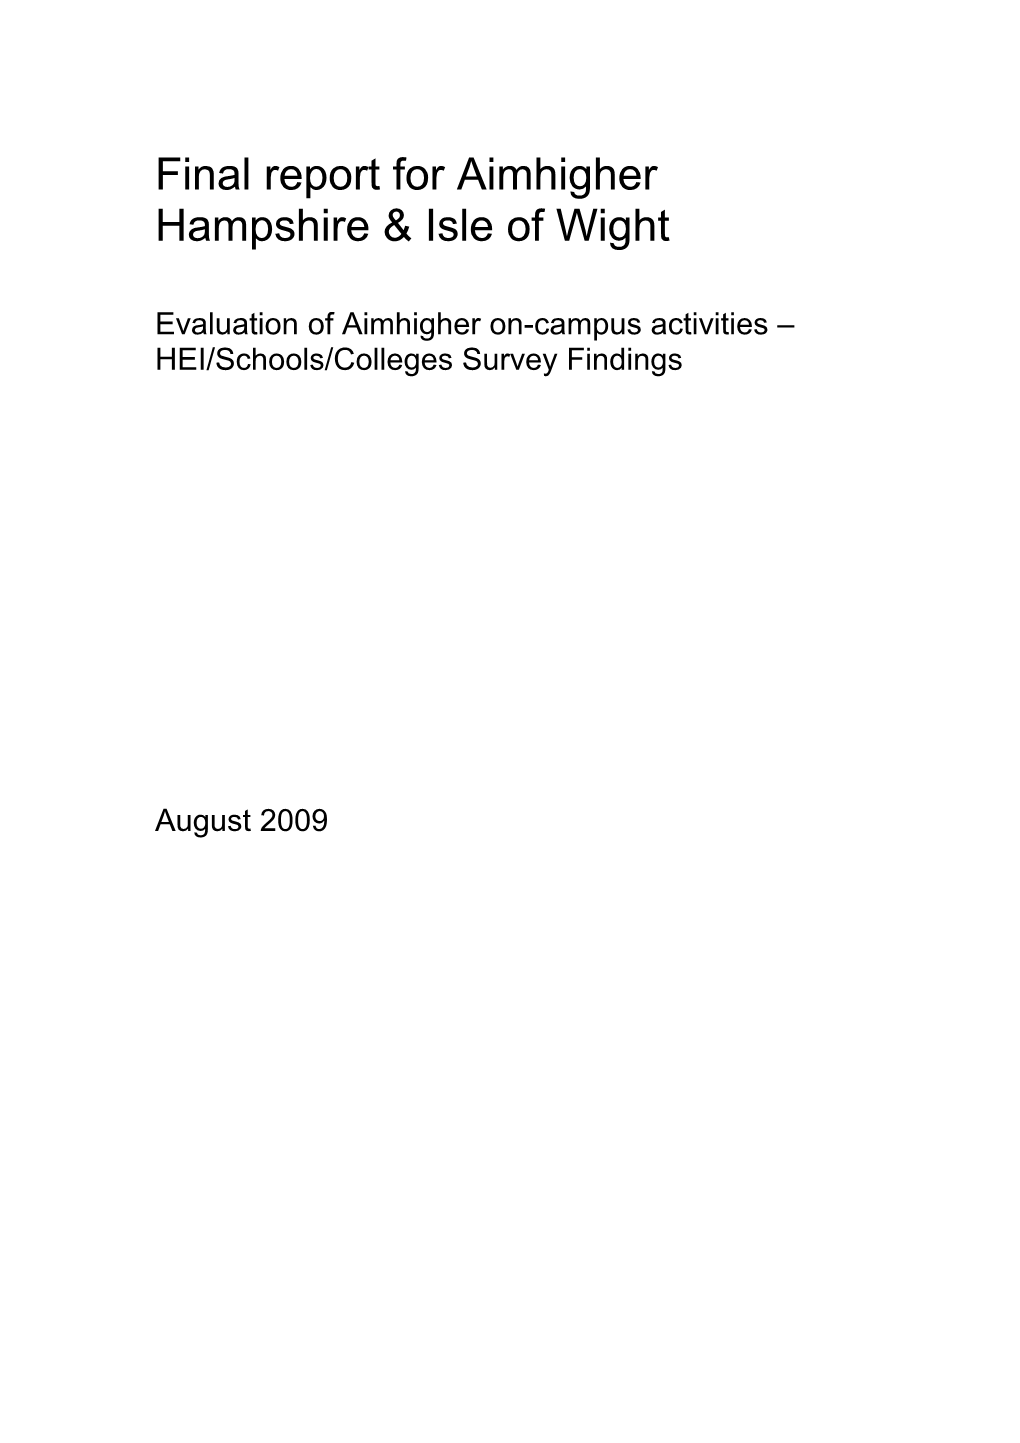 Final Report for Aimhigher Hampshire & Isle of Wight